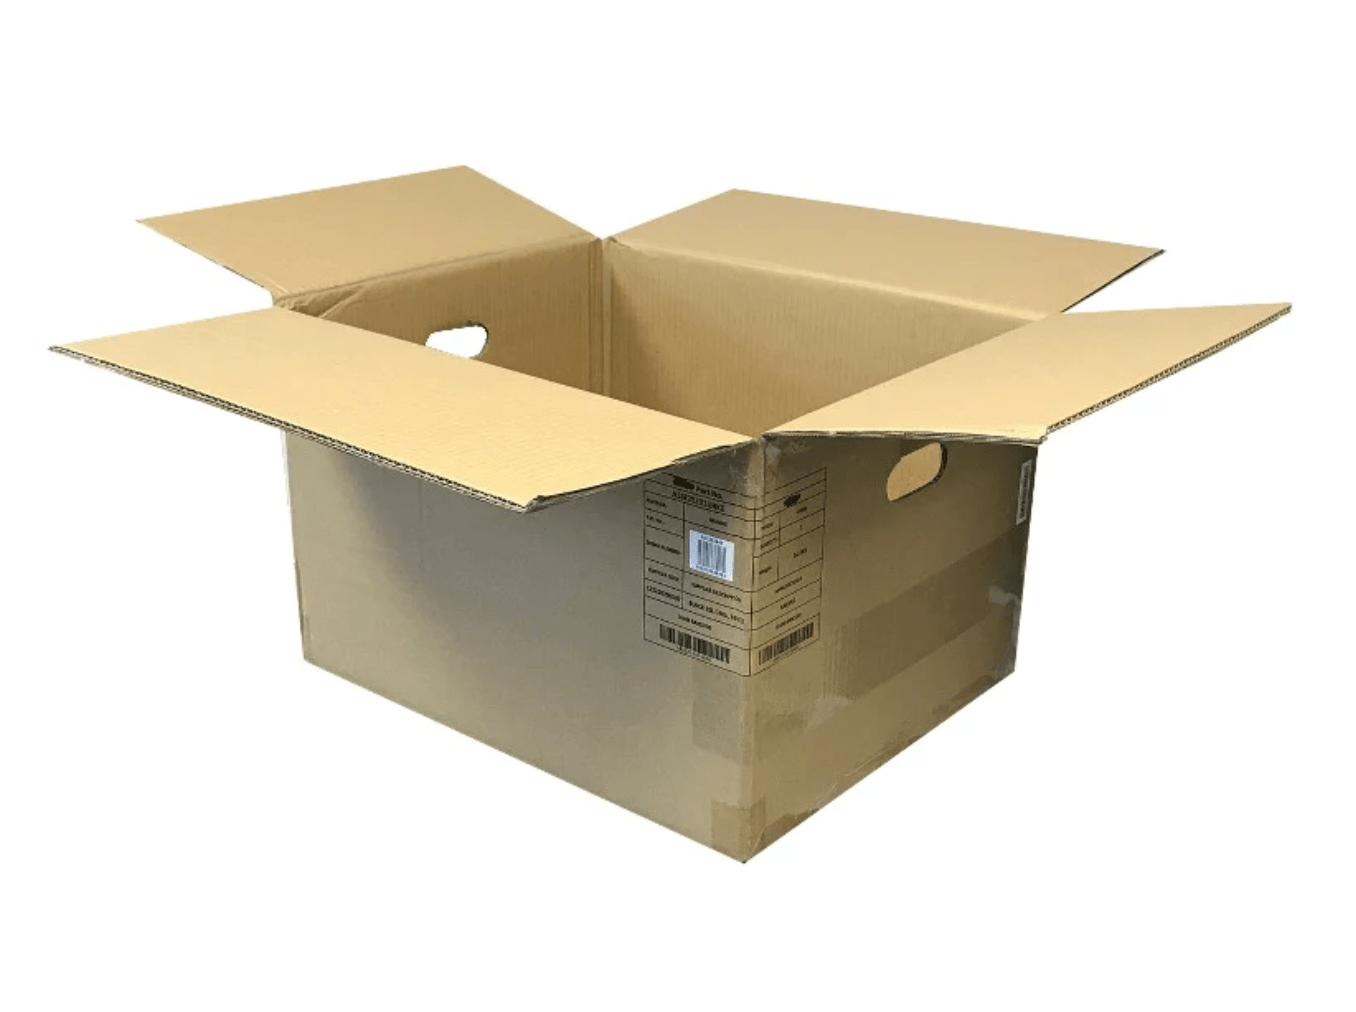 300 x Used Printed Strong Double Wall Box - 535 x 425 x 335mm - High Quality Recycled Once-Used Cardboard Boxes online - Black Country Boxes